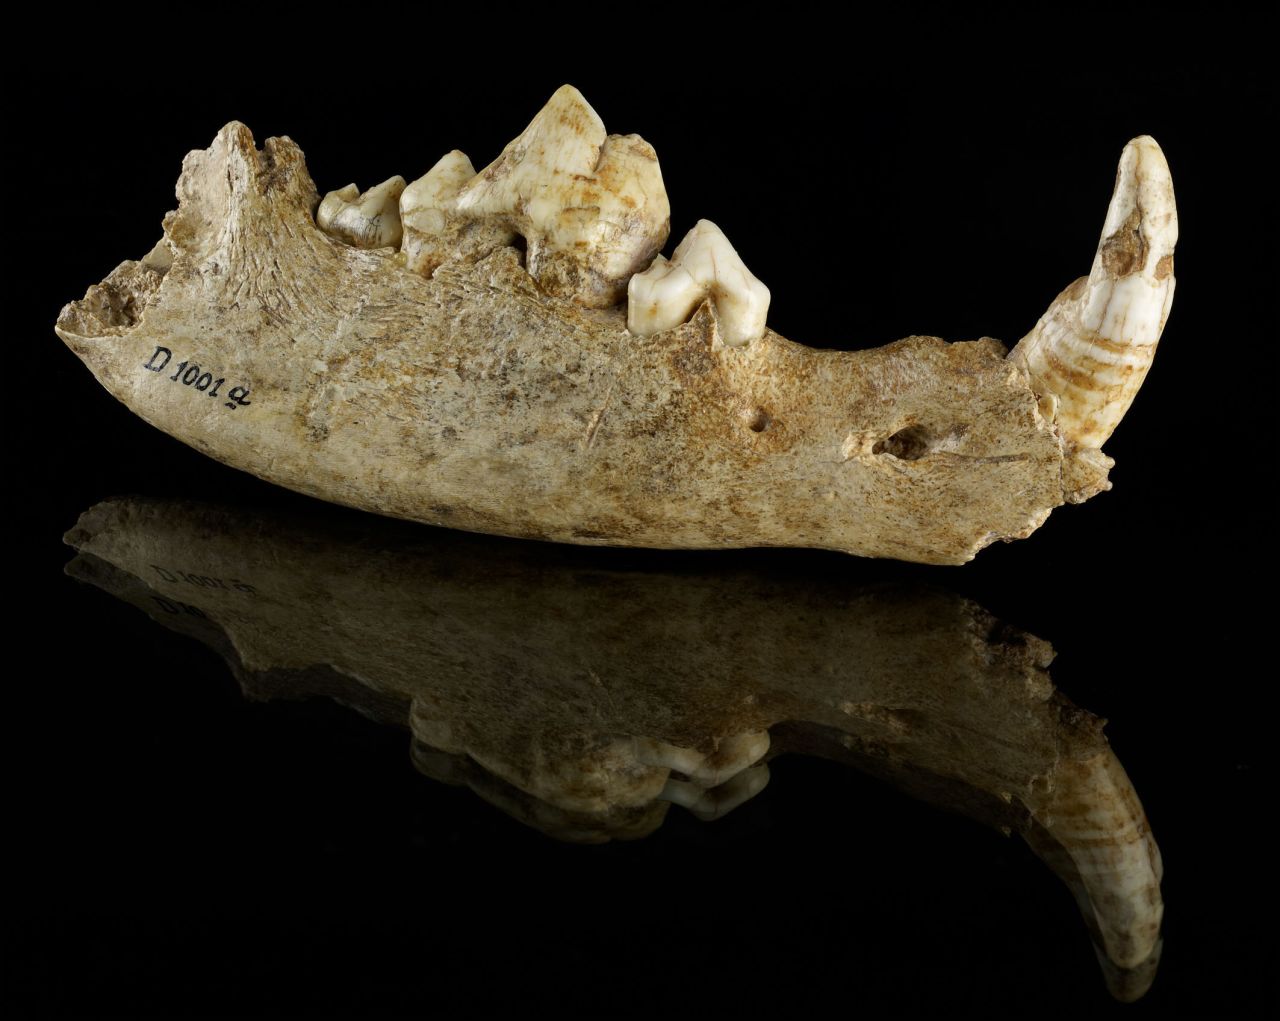 Mandible of a dog from the Oberkassel site in Germany, approximately 14,700 years old. 